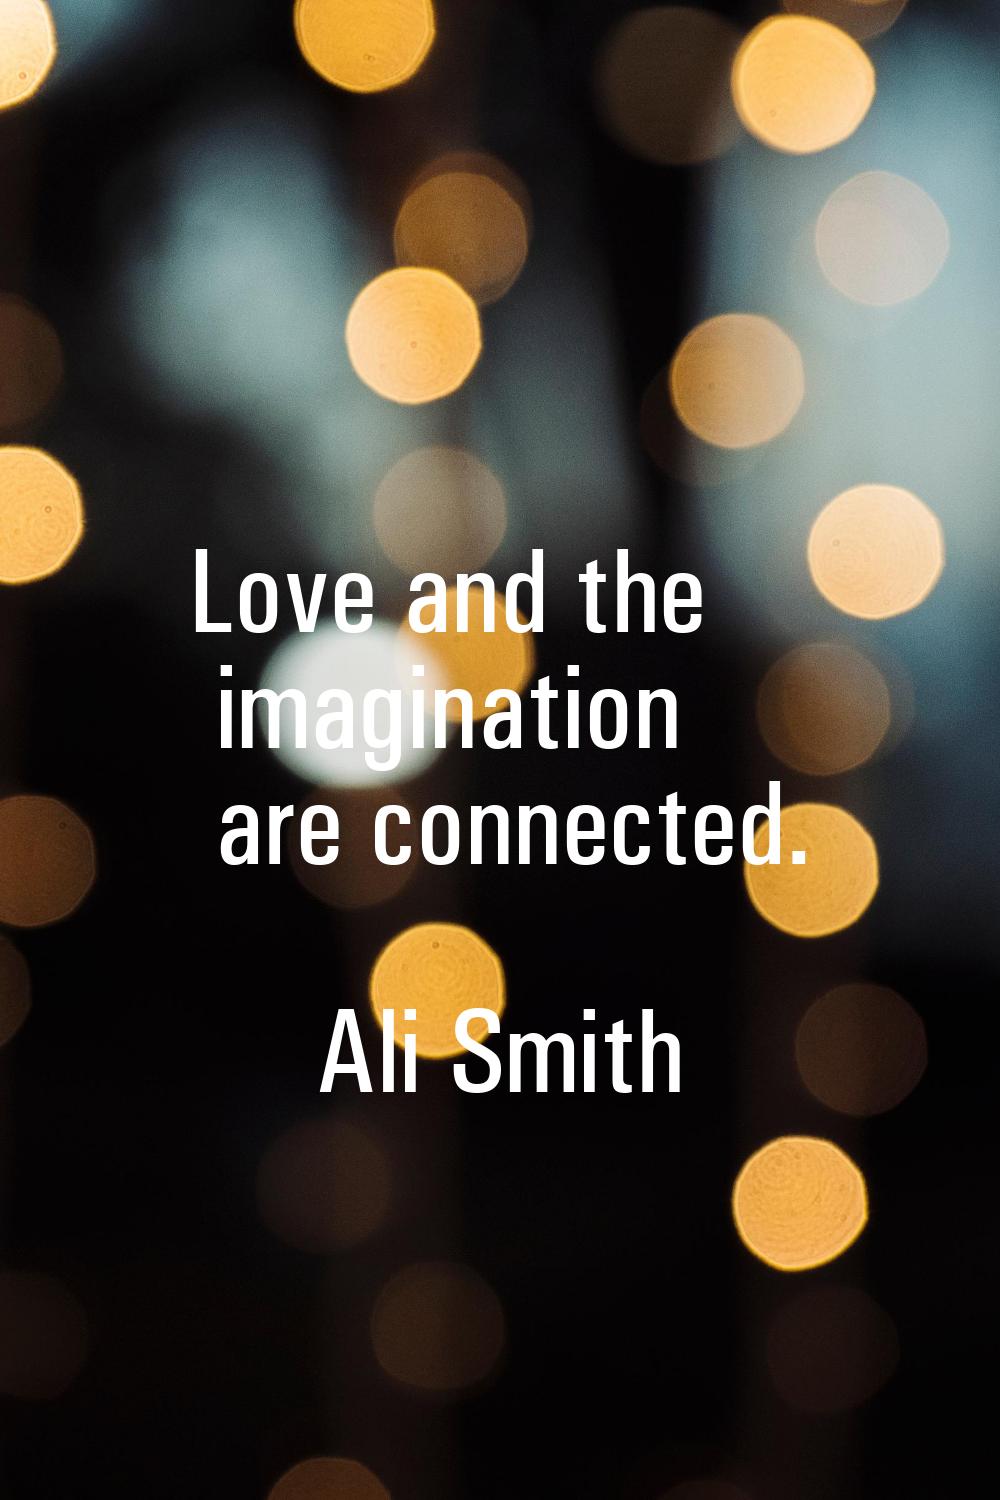 Love and the imagination are connected.